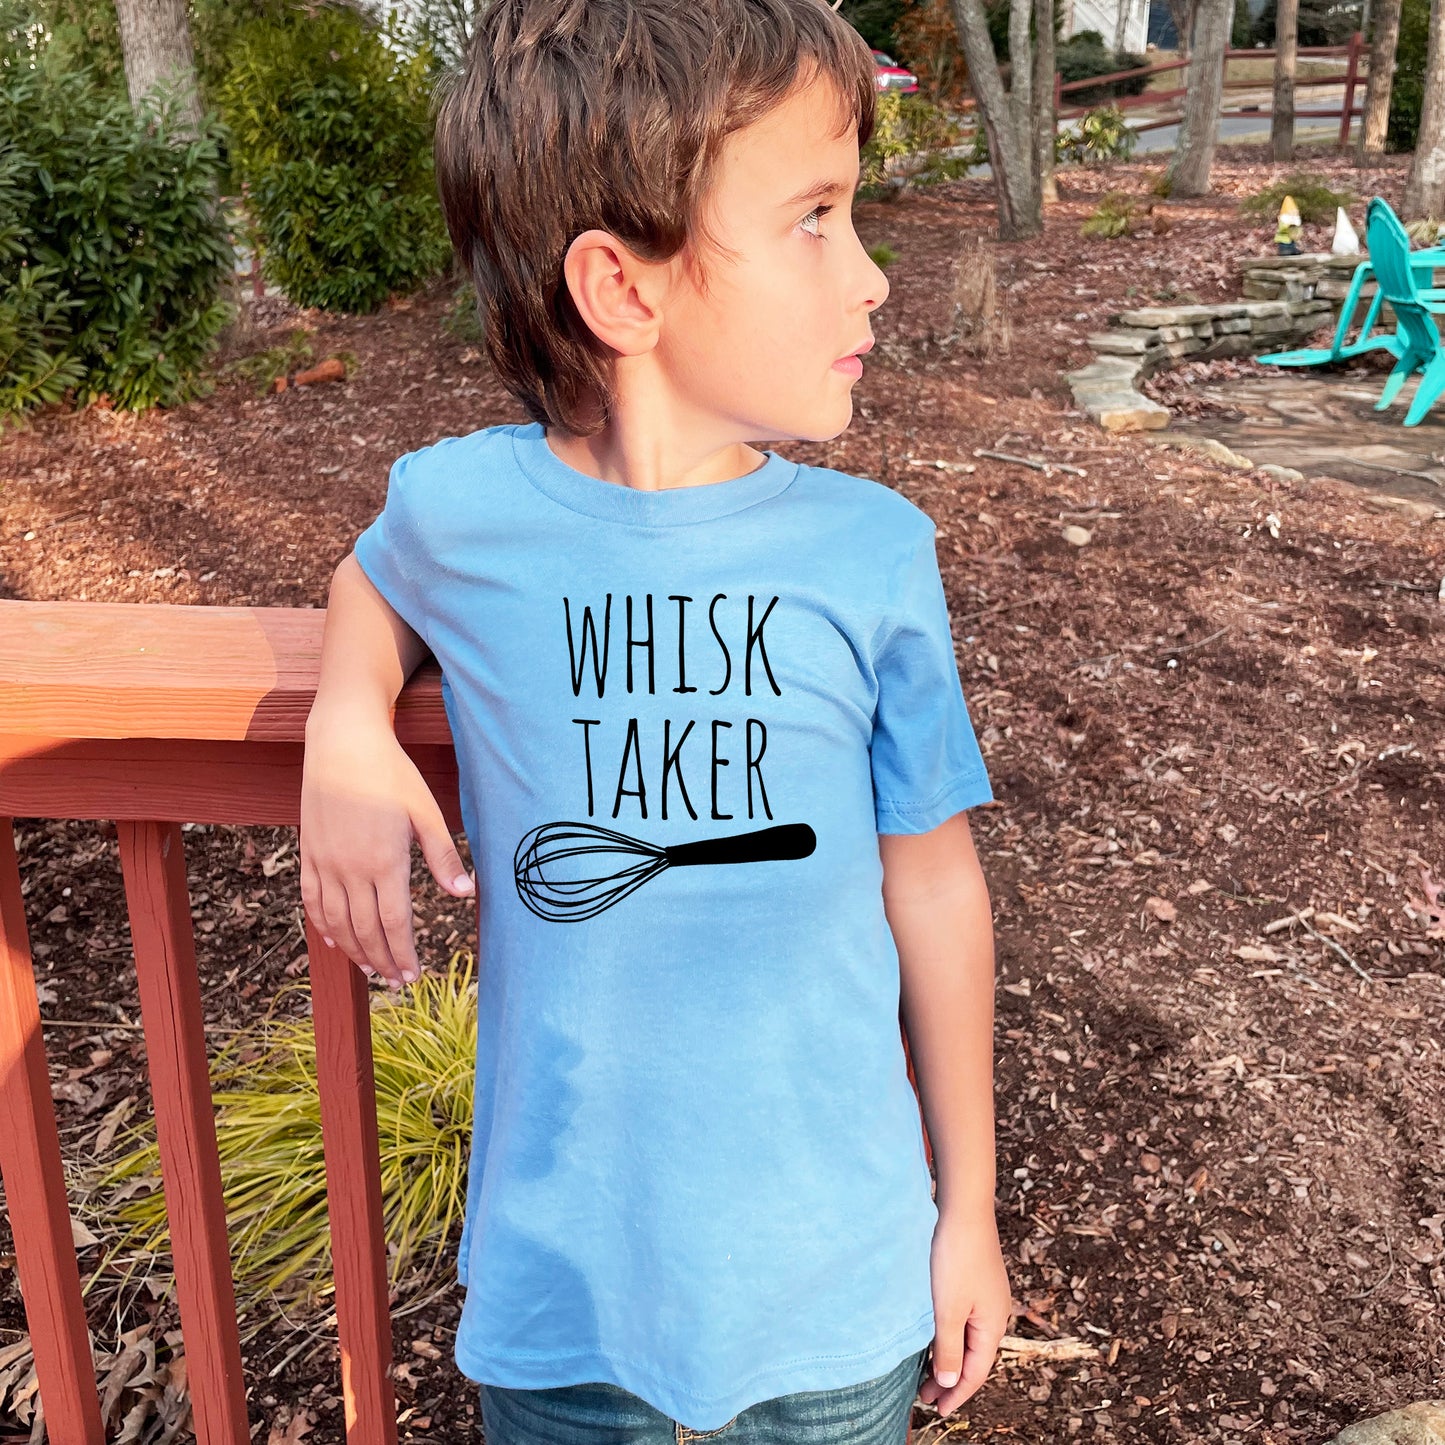 Whisk Taker (Baking) - Kid's Tee - Columbia Blue or Lavender